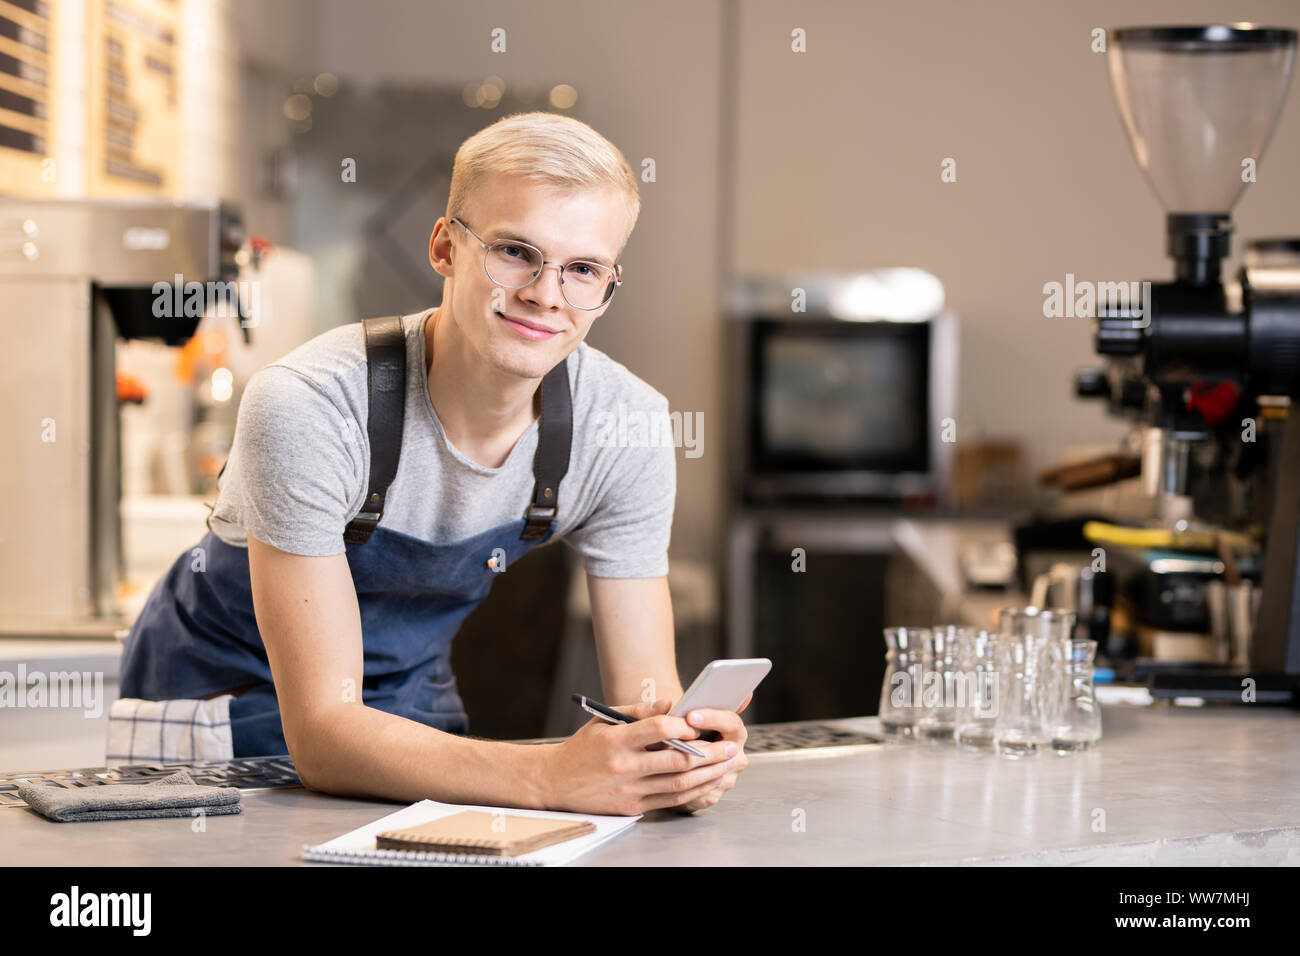 Happy waiter with pen and smartphone standing by workplace in front of camera Stock Photo